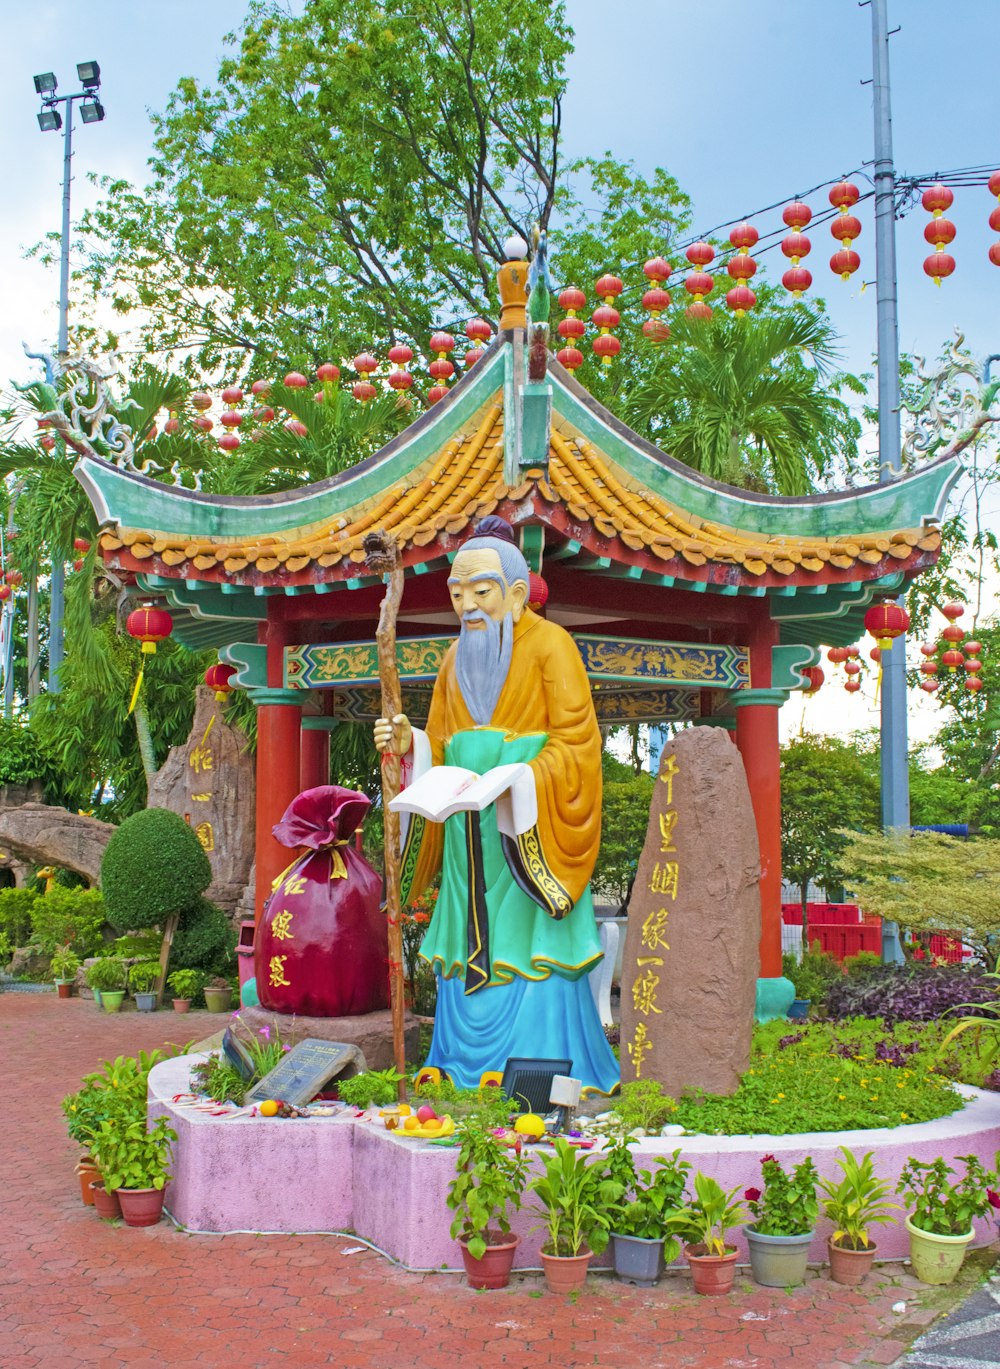 a statue of a man holding a staff in a garden